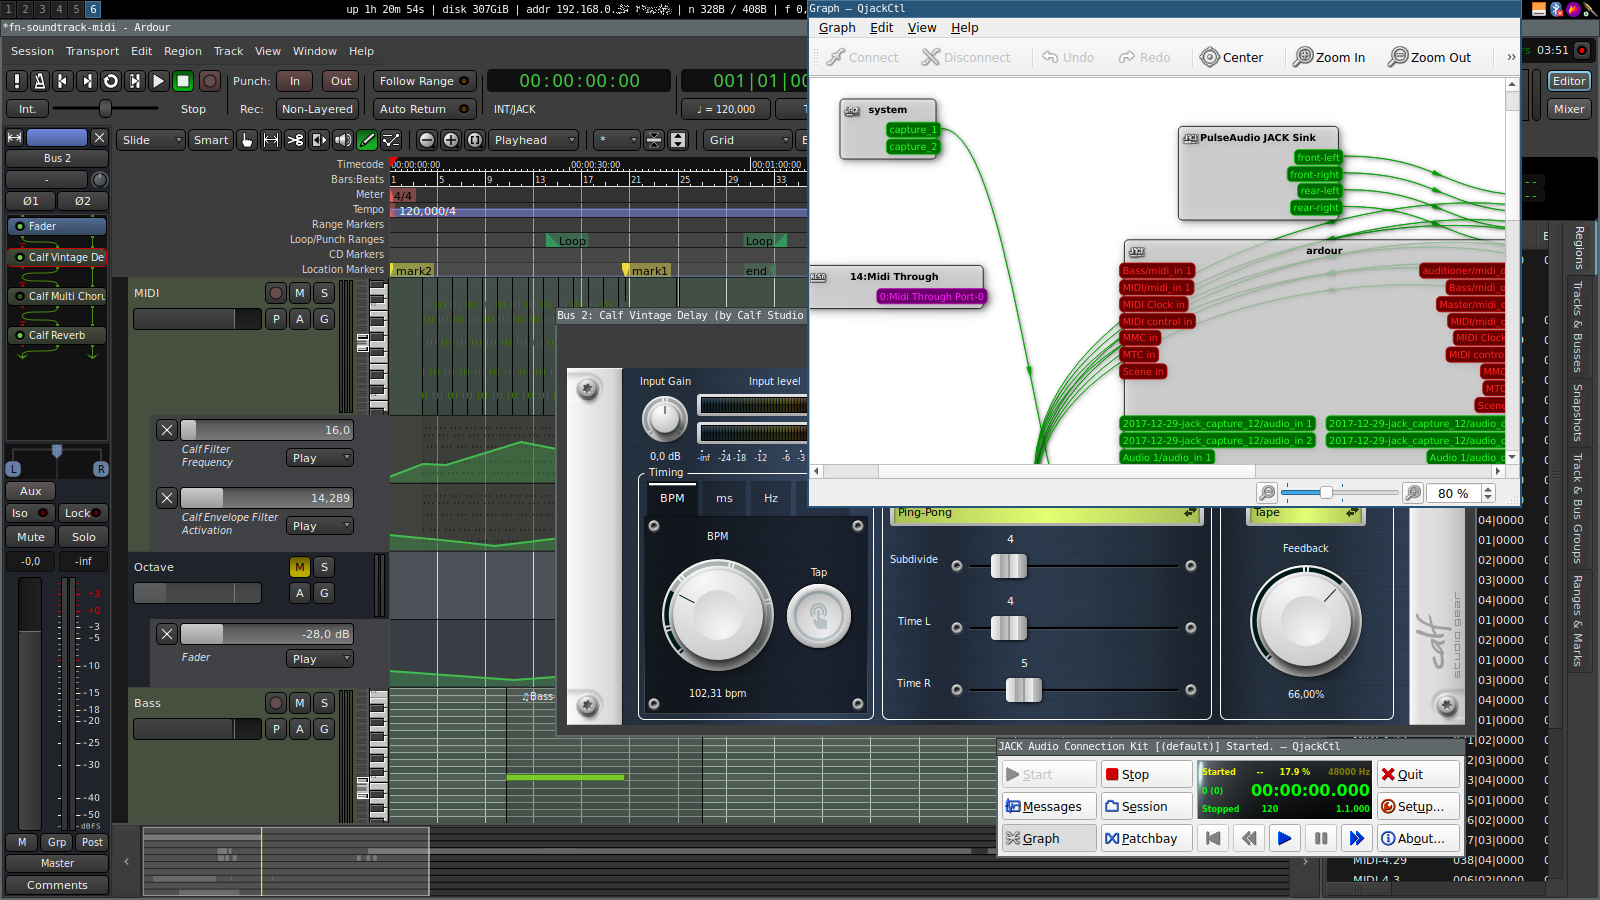 A screen shot of Ardour5 main window with midi tracks and automation curves, a Calf Vintage Delay effect, a qJackCtl's main and Graph windows.